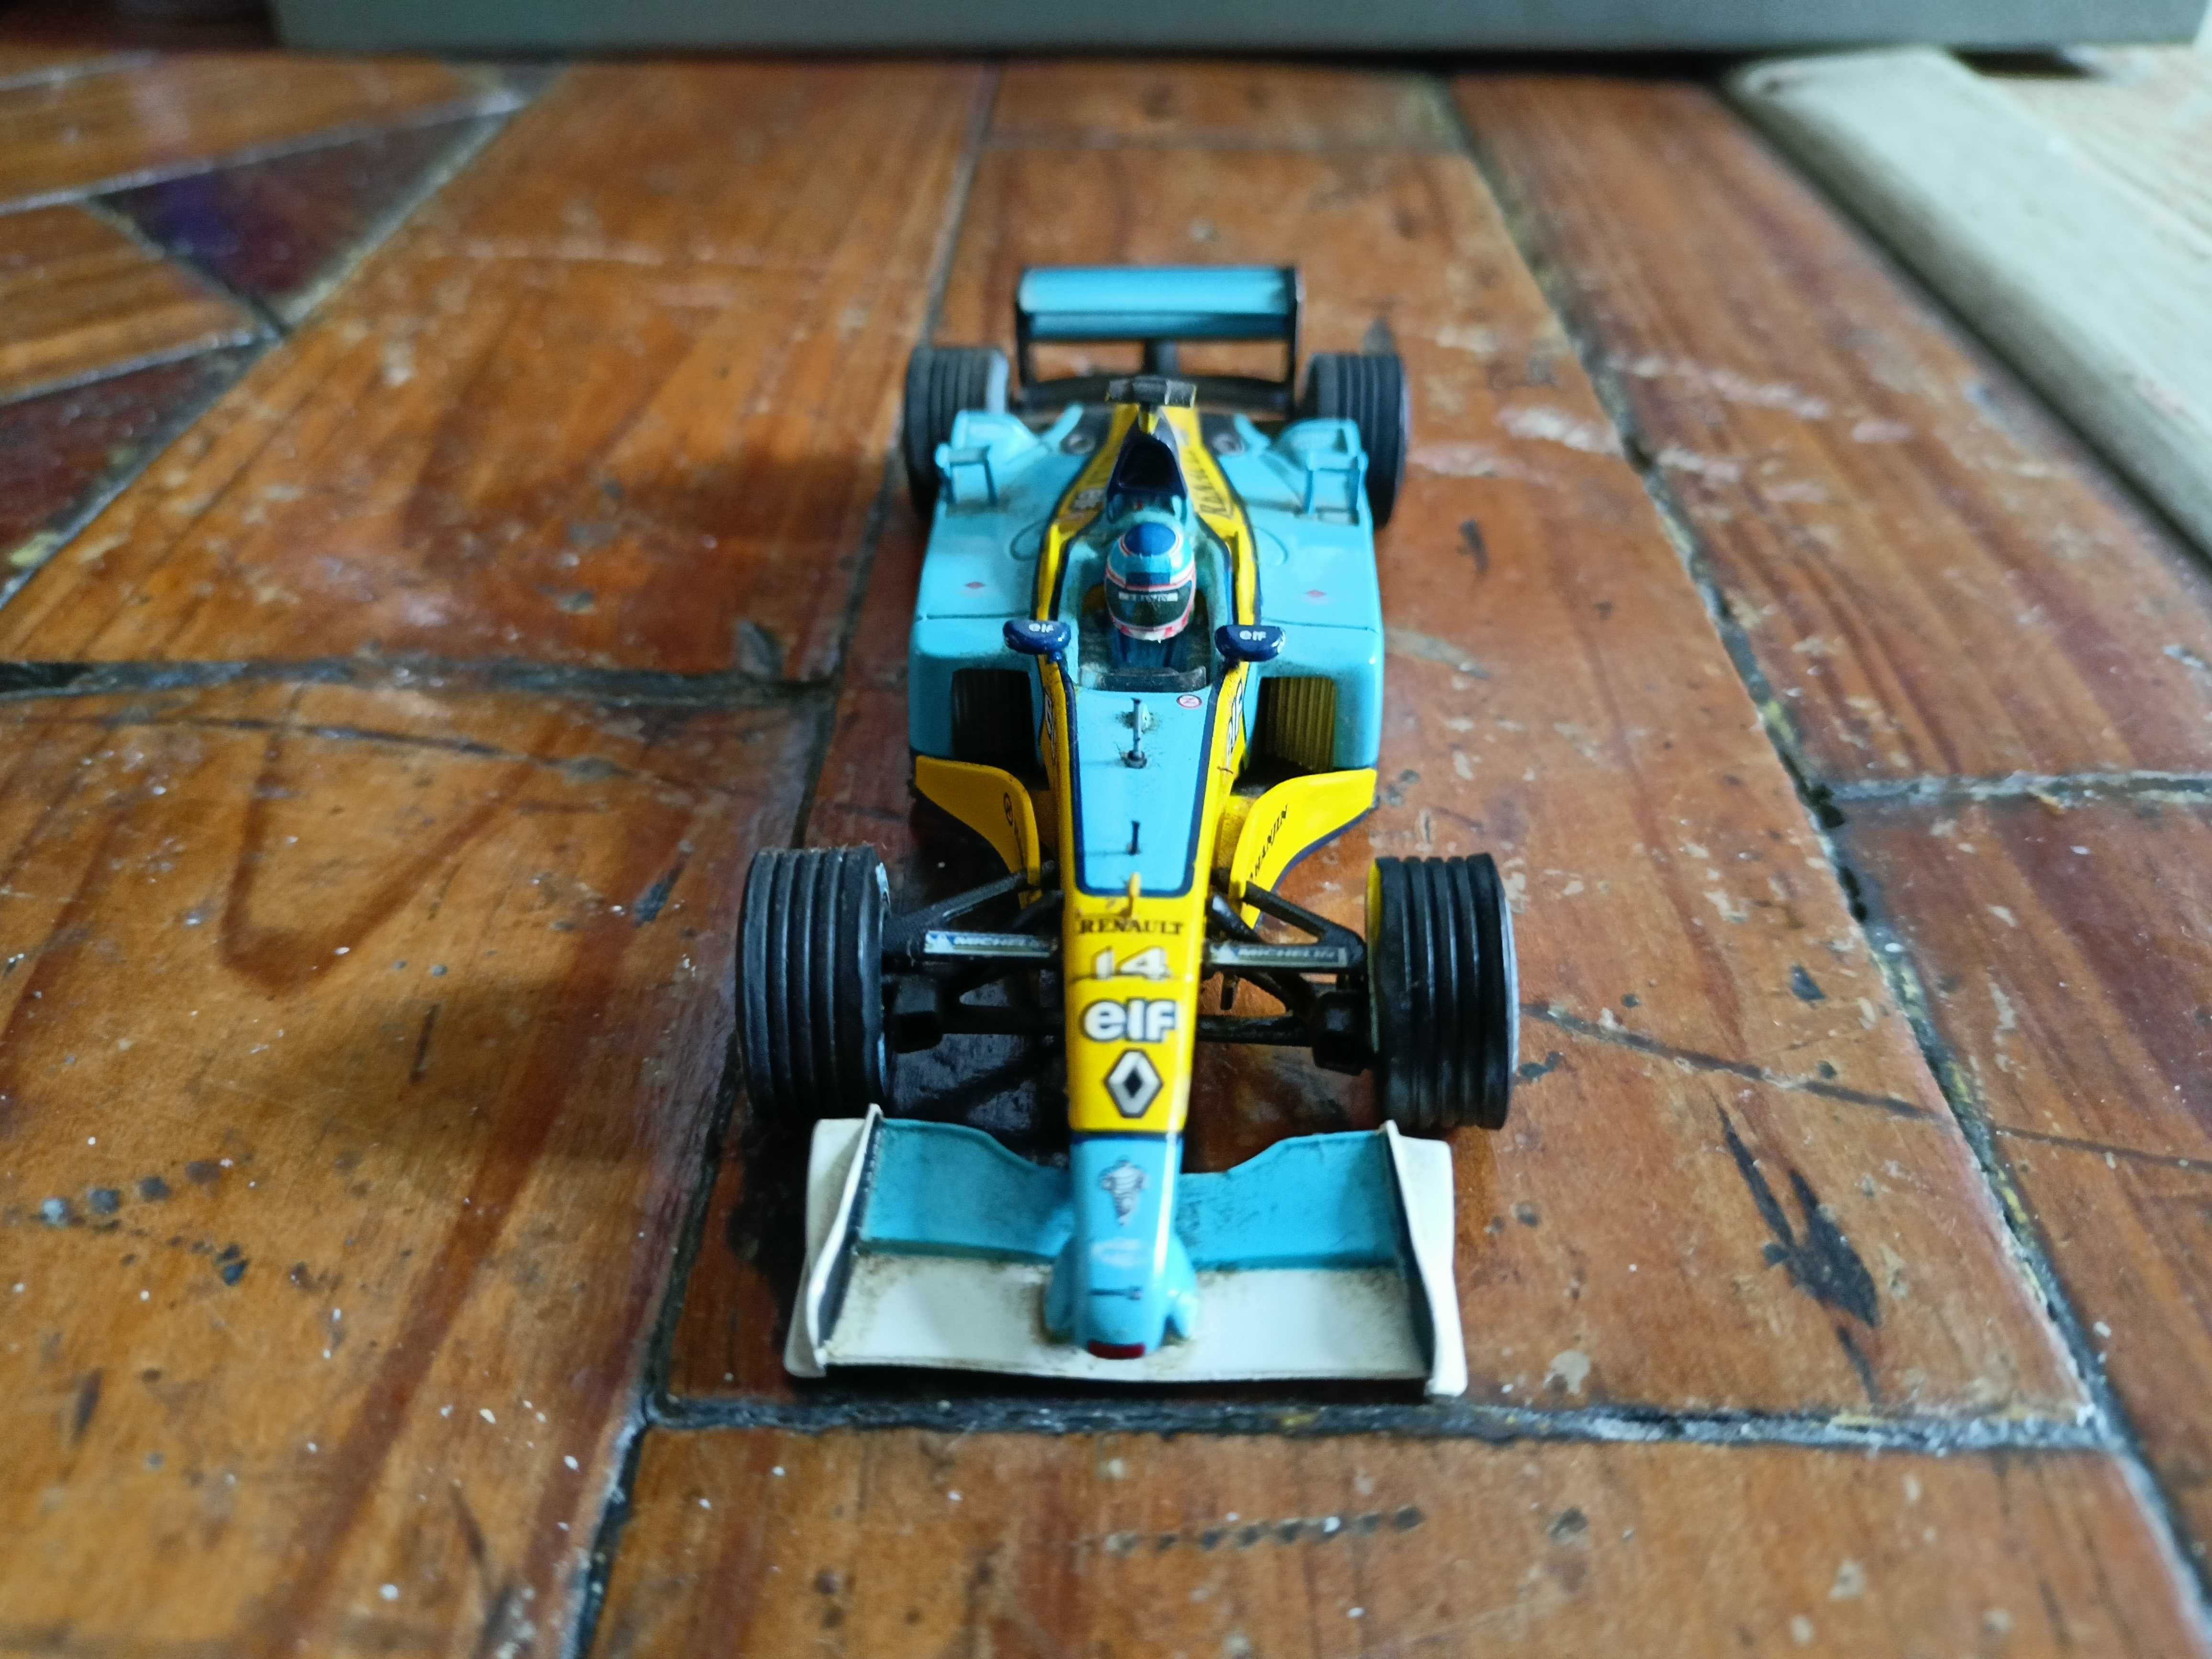 Renault F1 Alonso 1:43